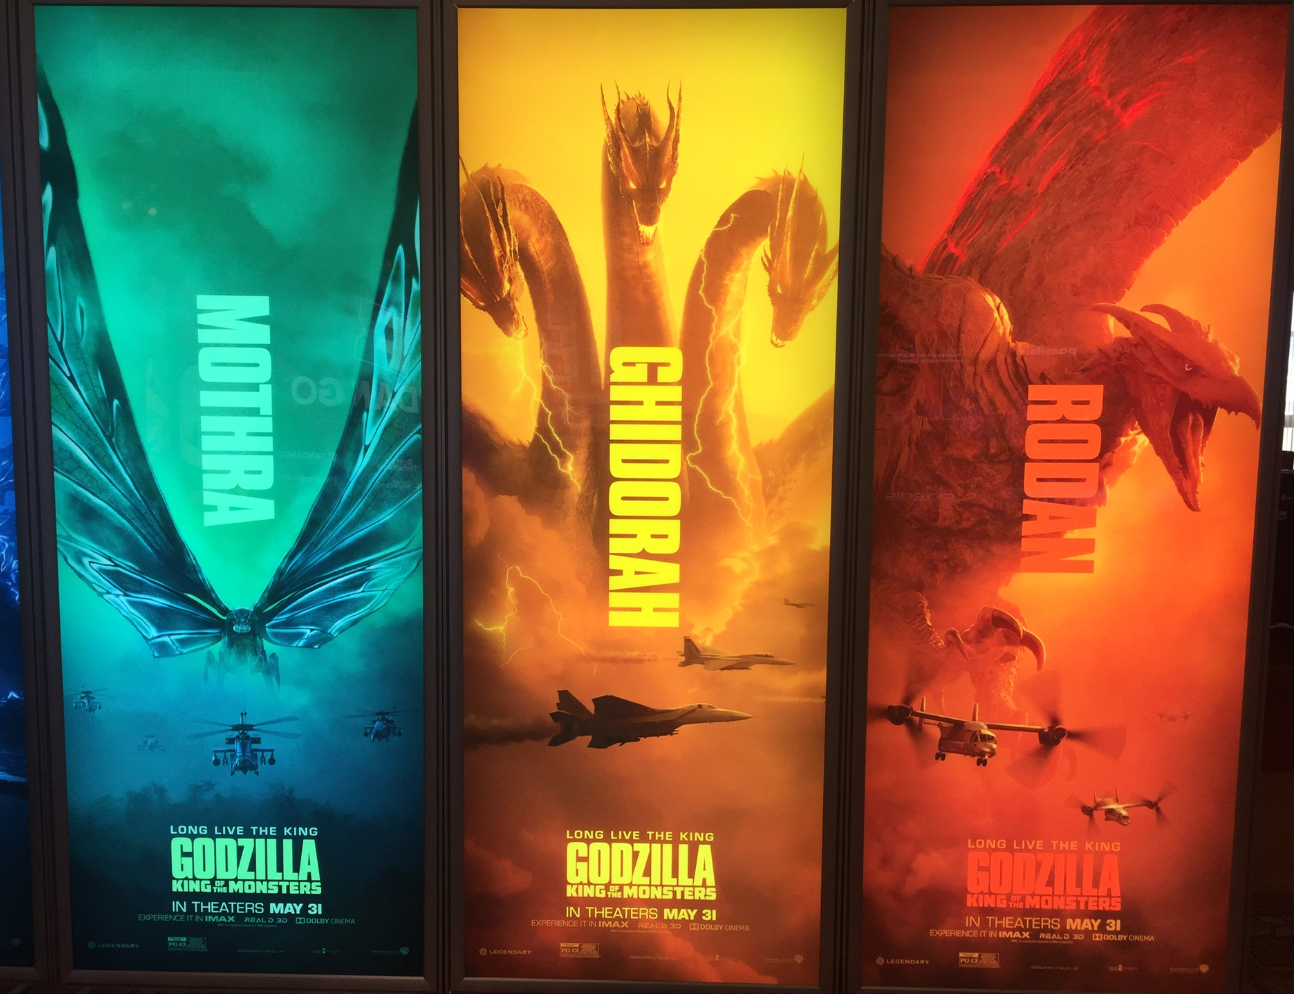 CinemaCon: New Movie Posters Including Avengers, Sonic and Godzilla | Collider1294 x 994